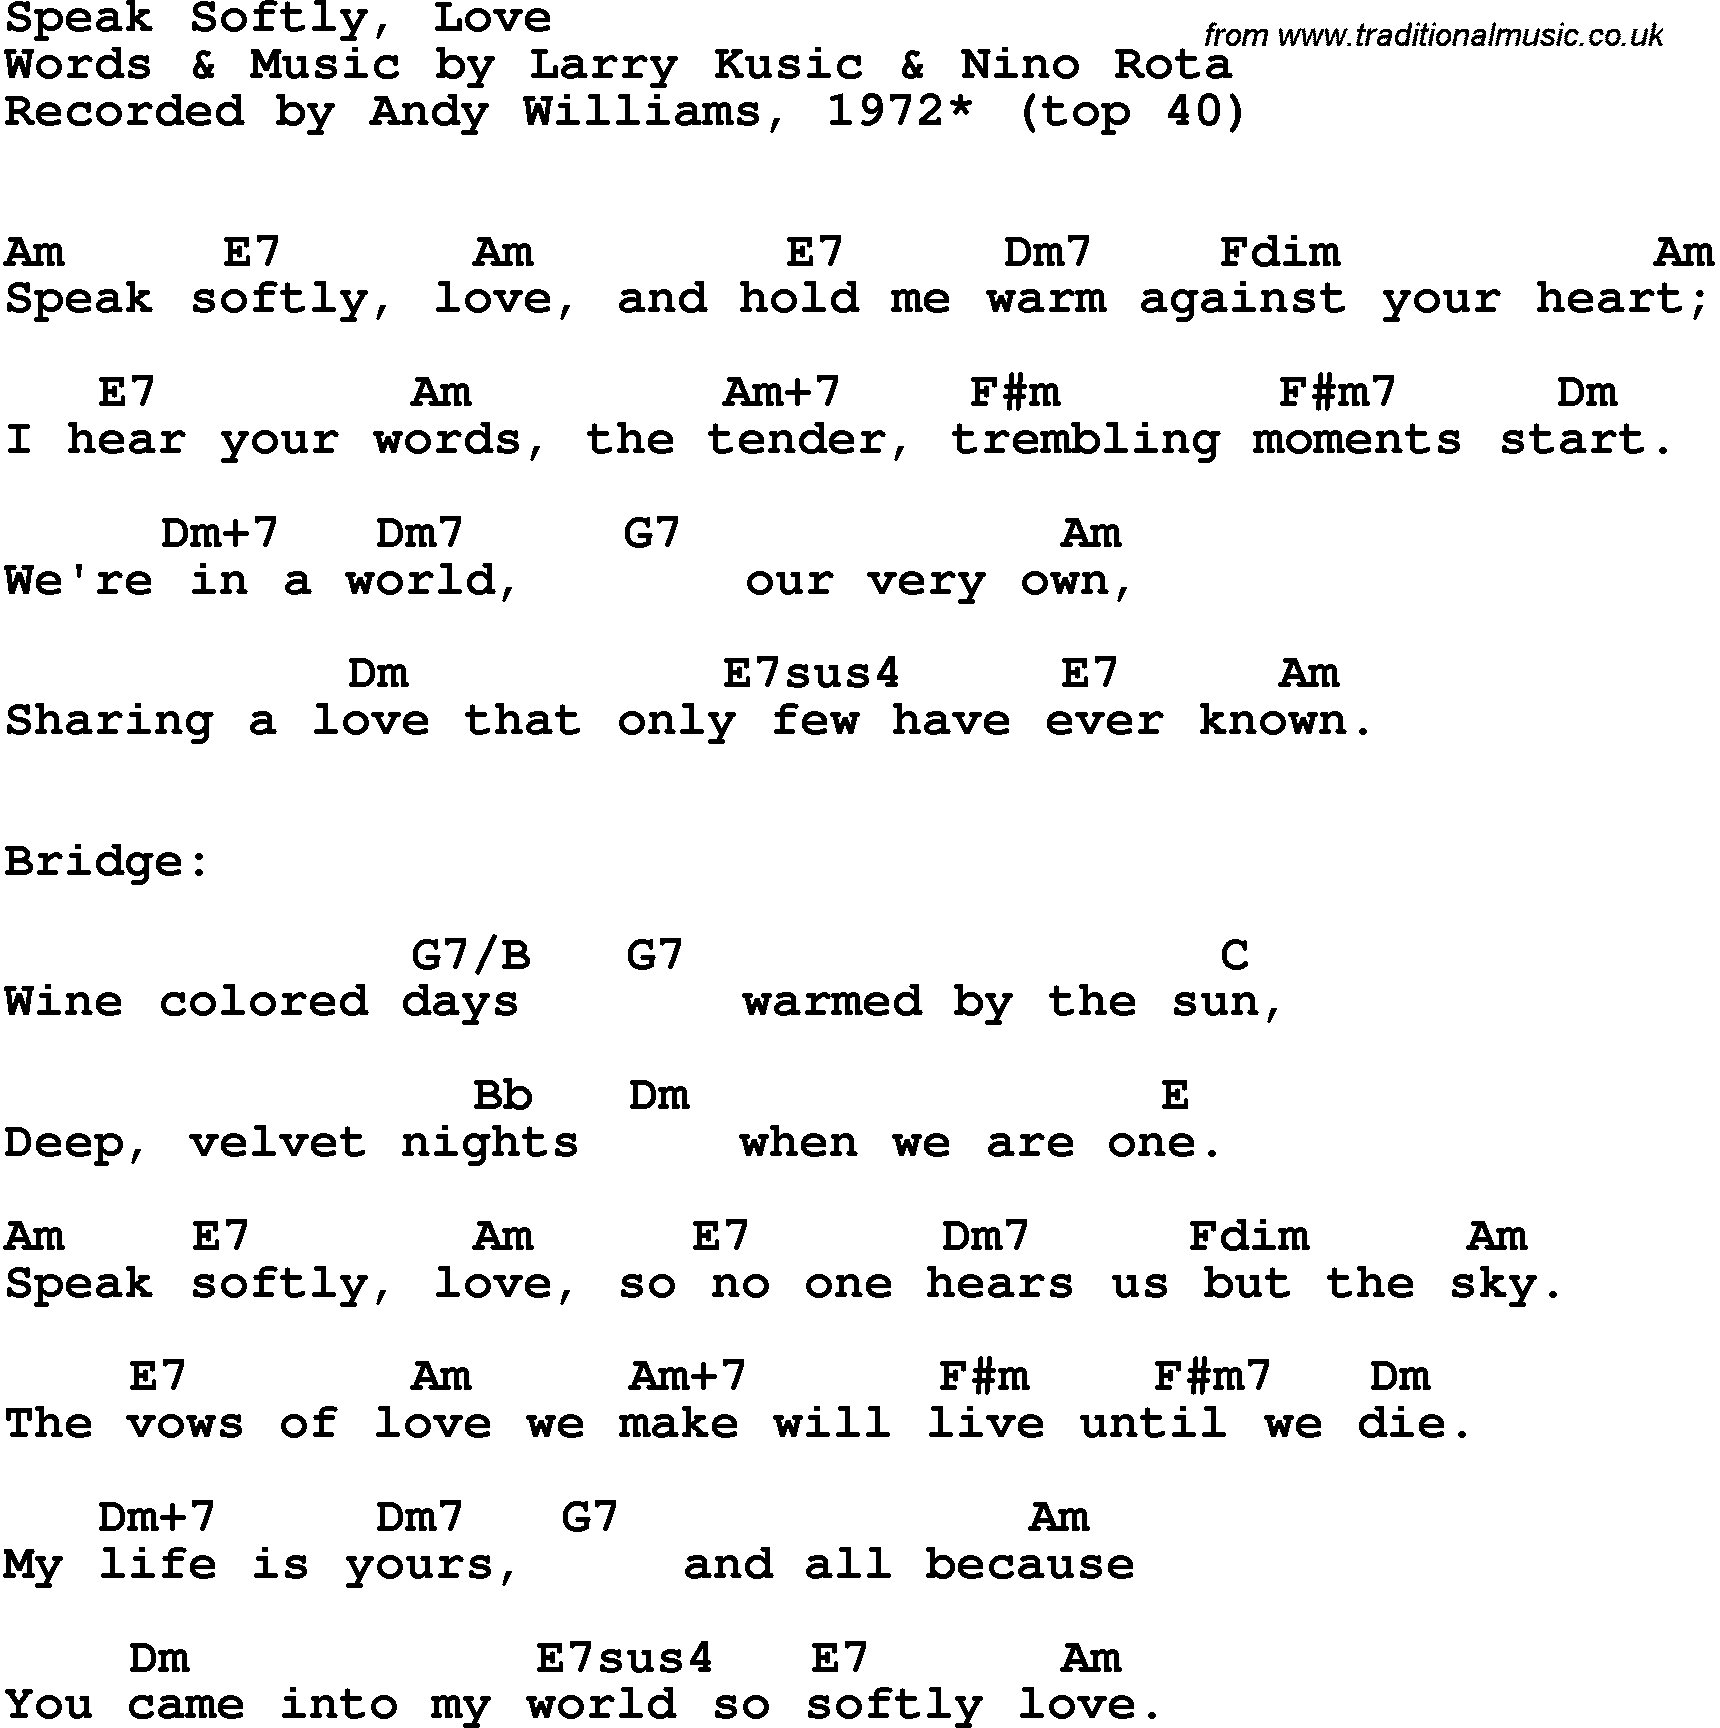 Song Lyrics with guitar chords for Speak Softly, Love - Andy Williams, 1972